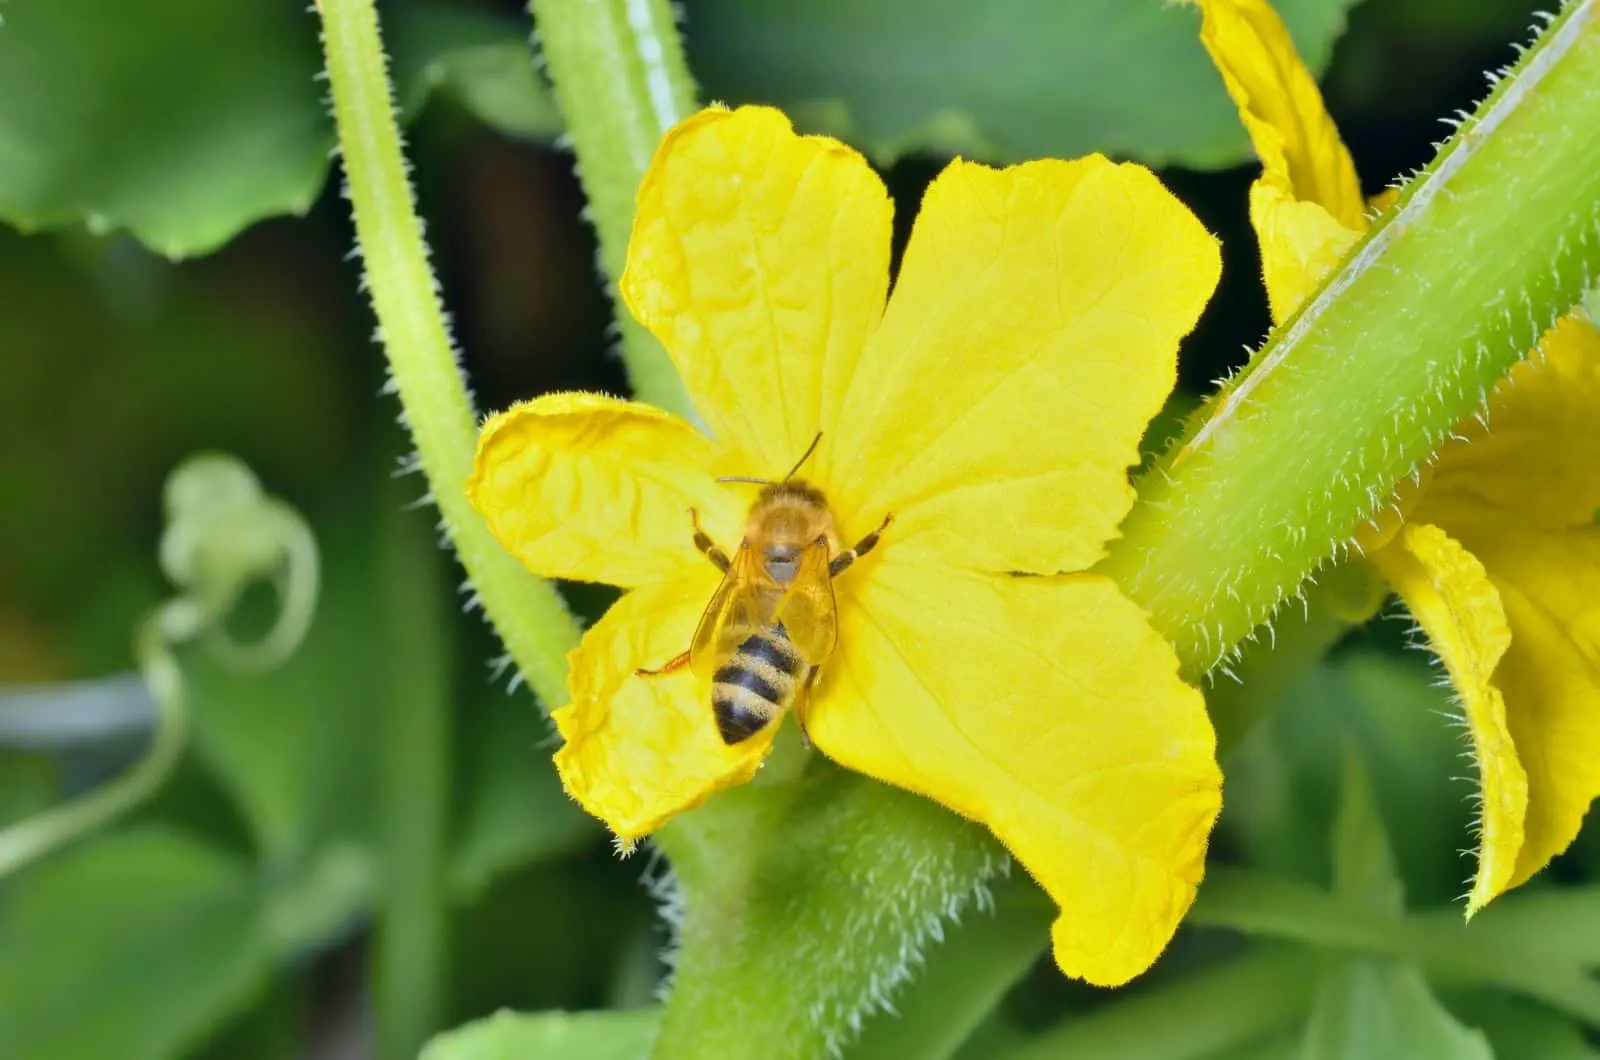 A close up of the bee on flower of cucumber